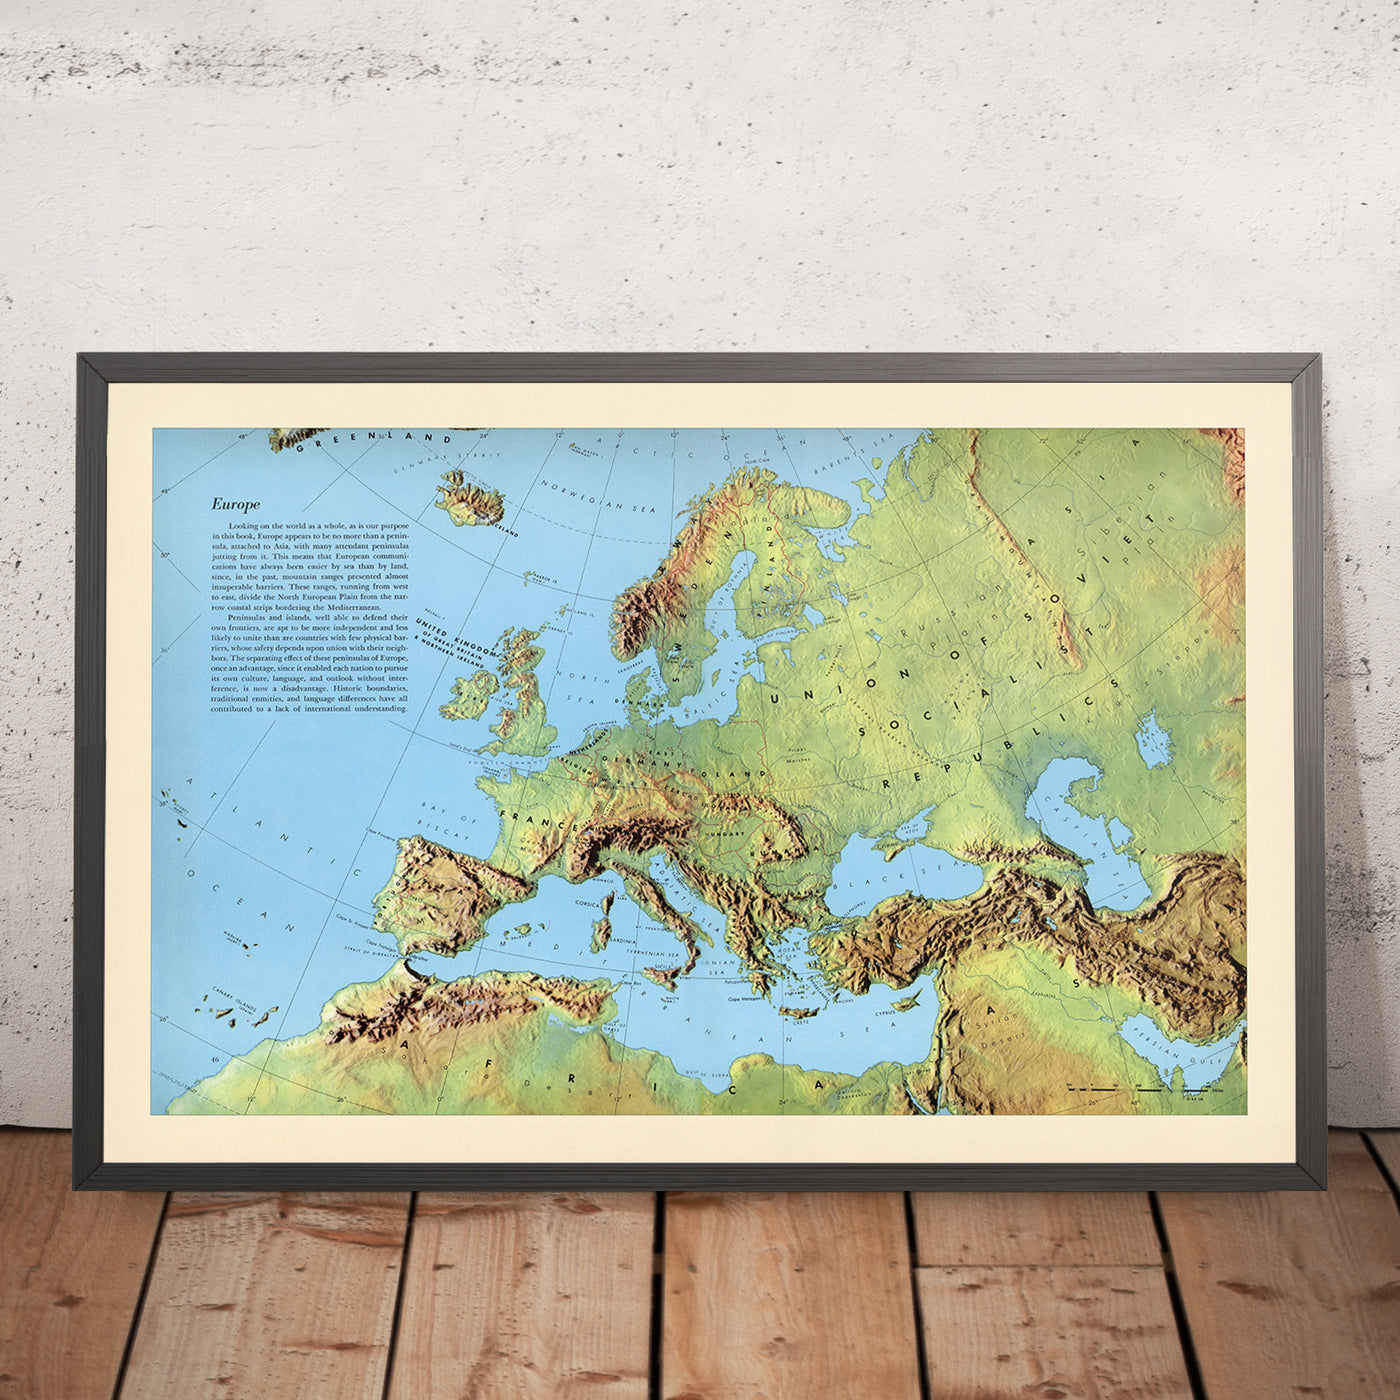 Old Shadow Relief Map of Europe by Debenham, 1958: Detailed Physical Map, Political Boundaries, Mountain Ranges